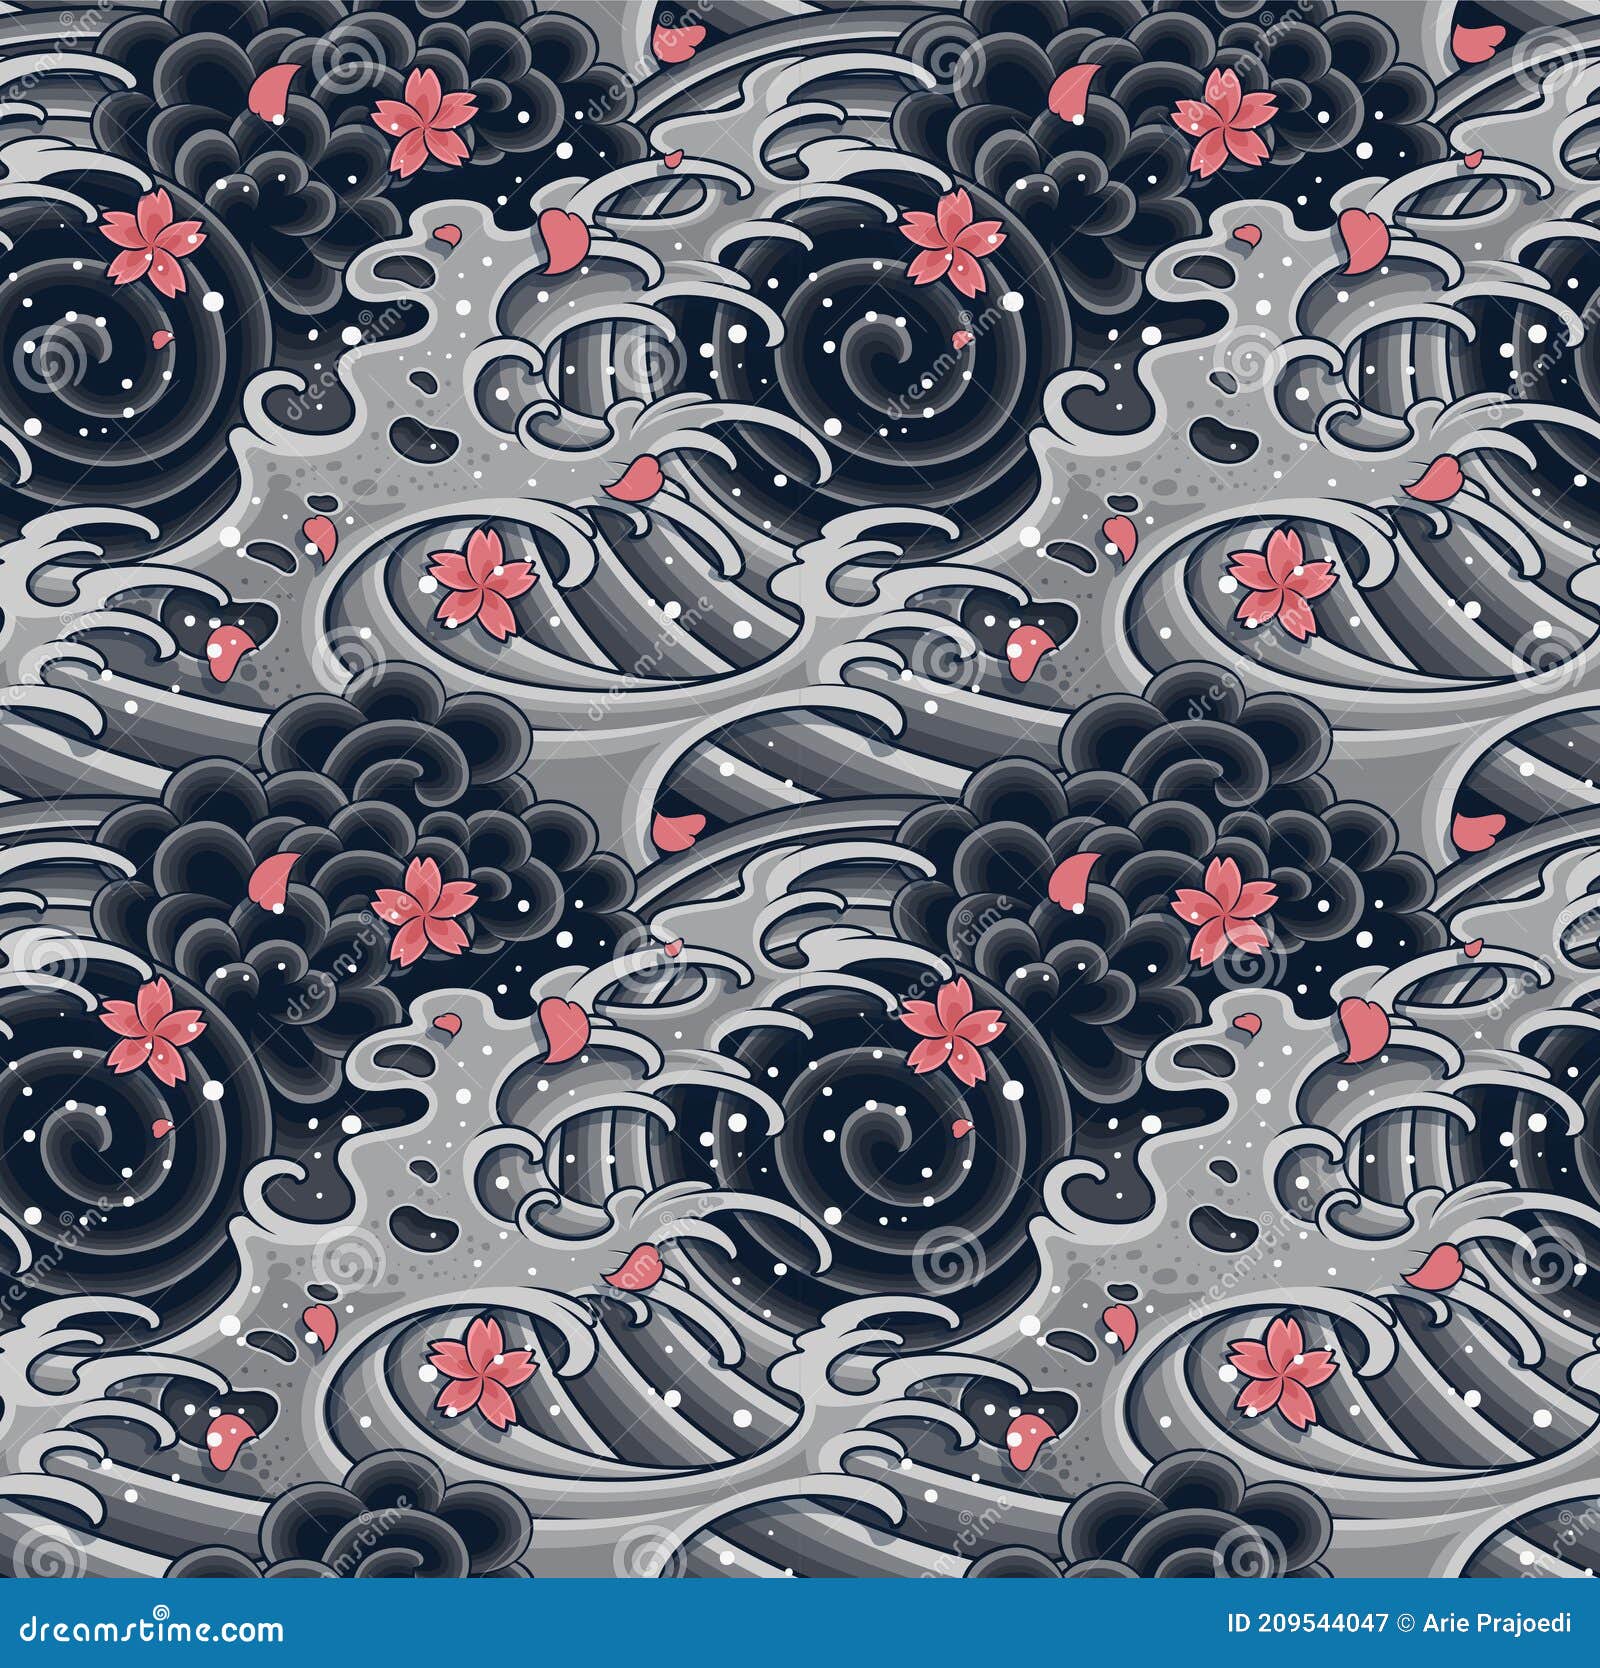 japanese wave with sakura seamless pattern for textile, background, garments or wallpaper